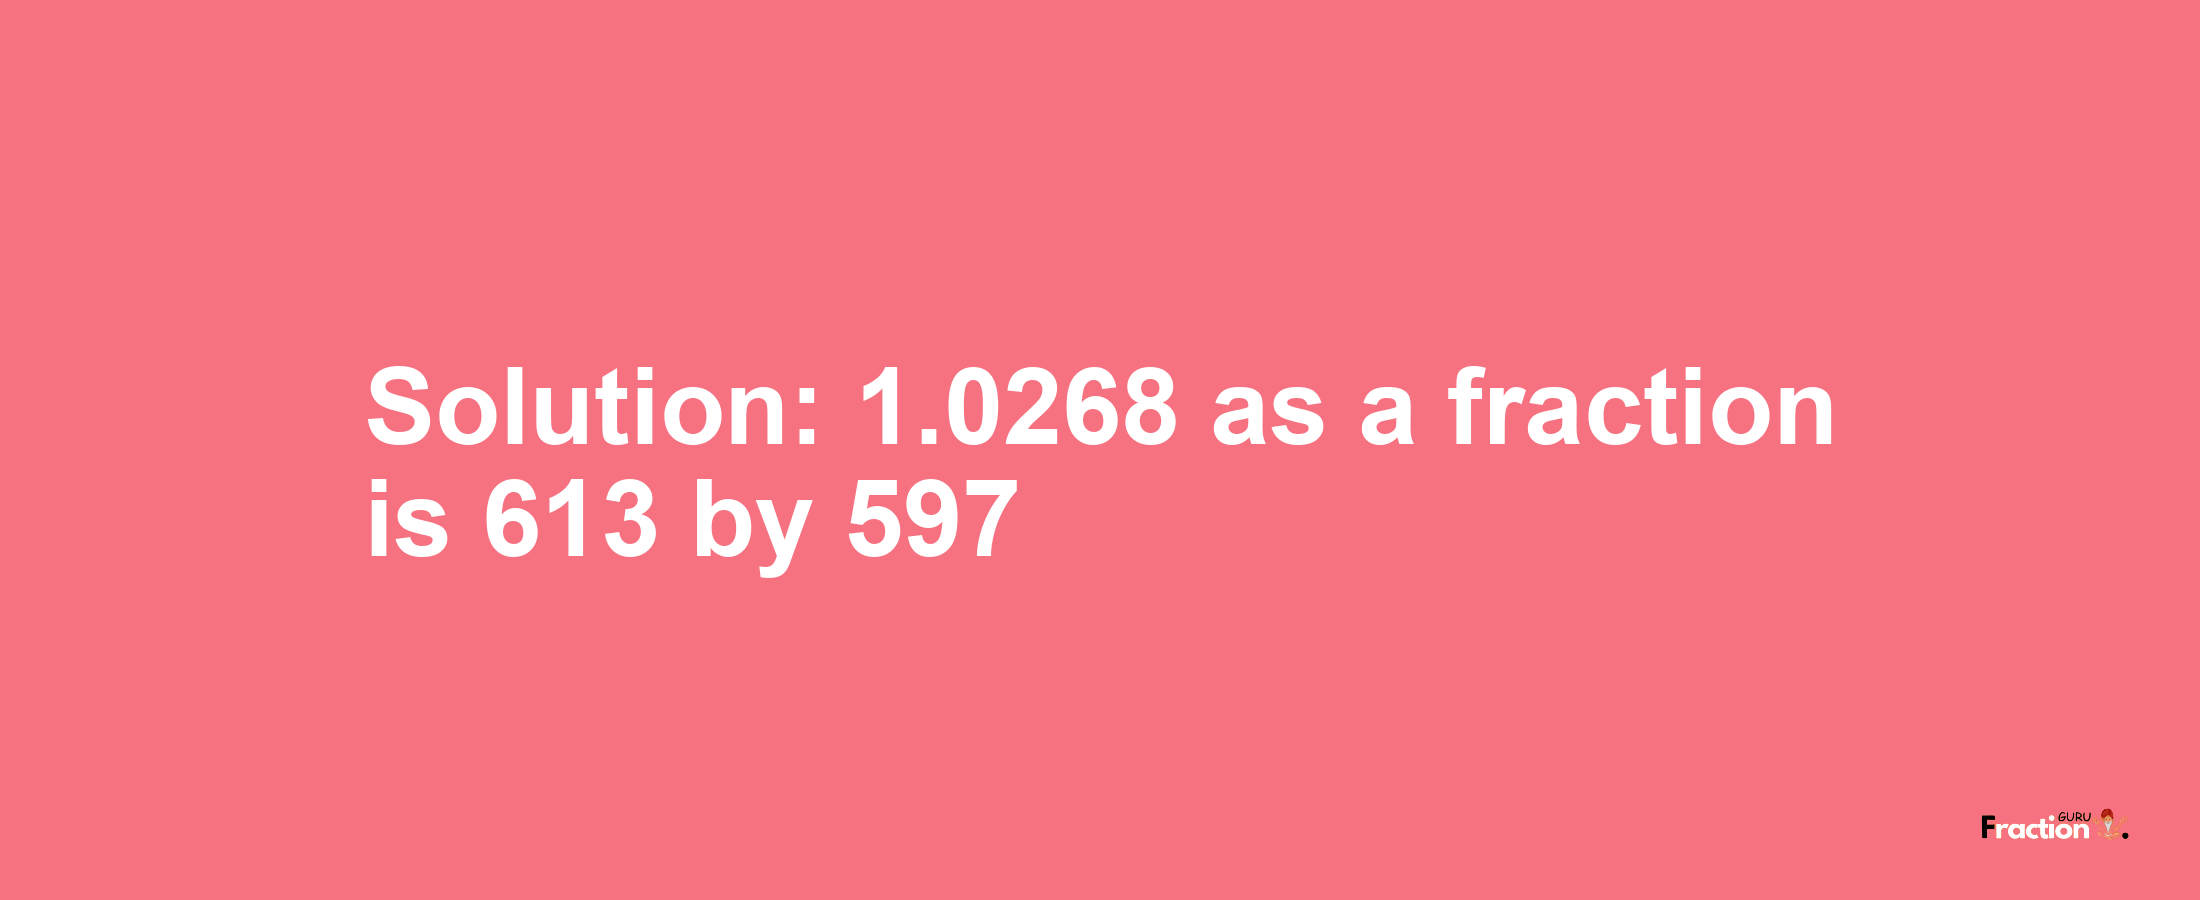 Solution:1.0268 as a fraction is 613/597